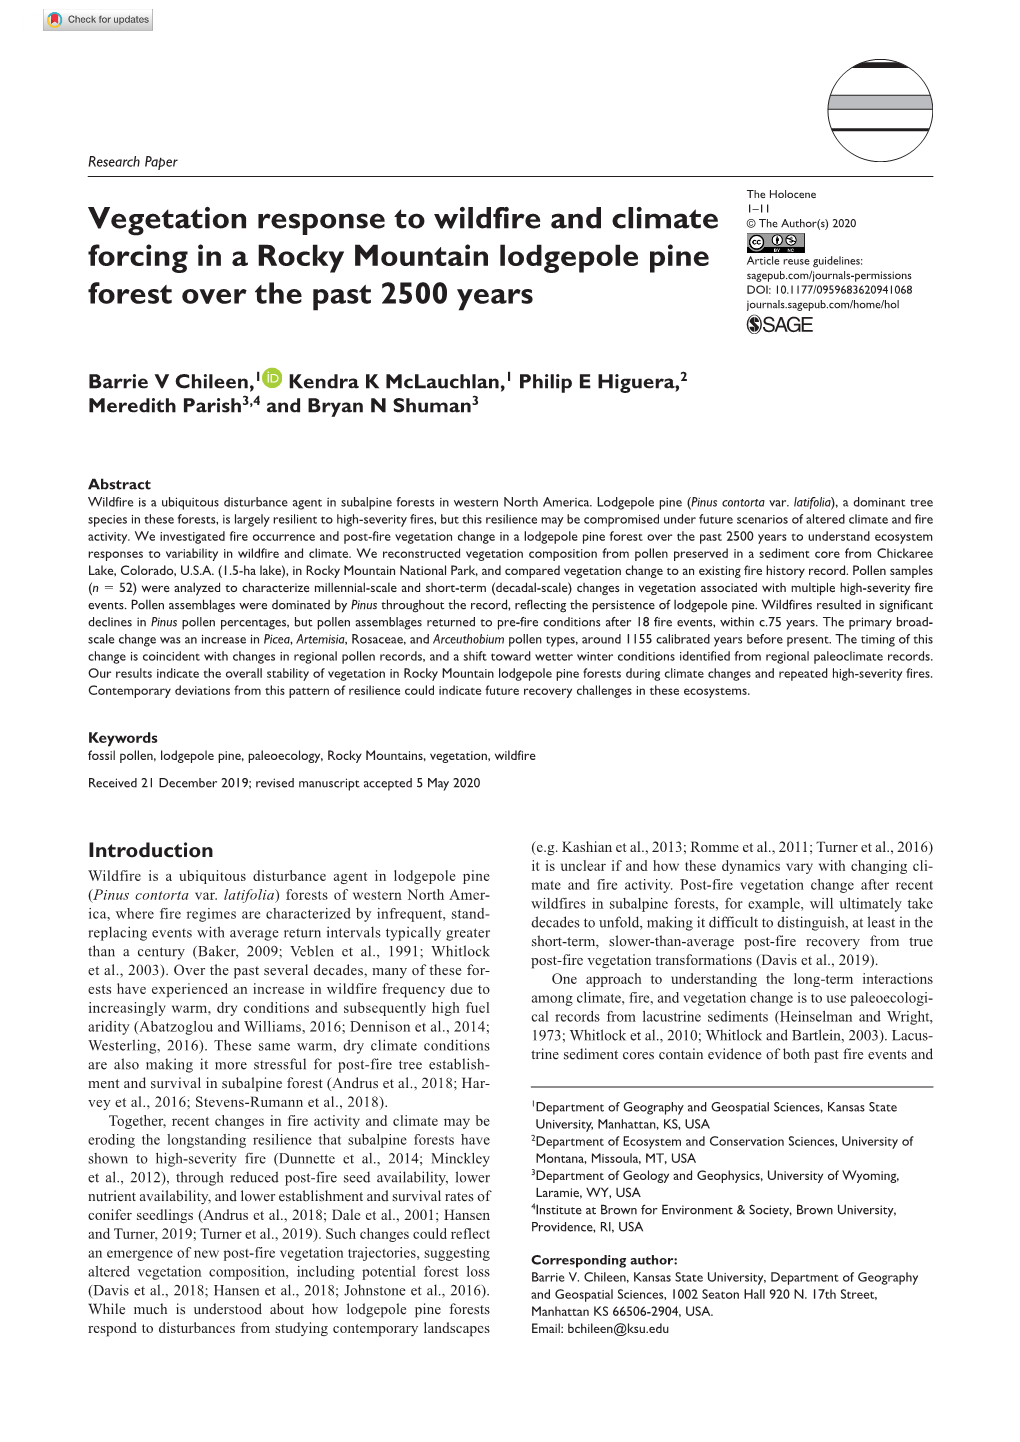 Vegetation Response to Wildfire and Climate Forcing in a Rocky Mountain Lodgepole Pine Forest Over the Past 2500 Years